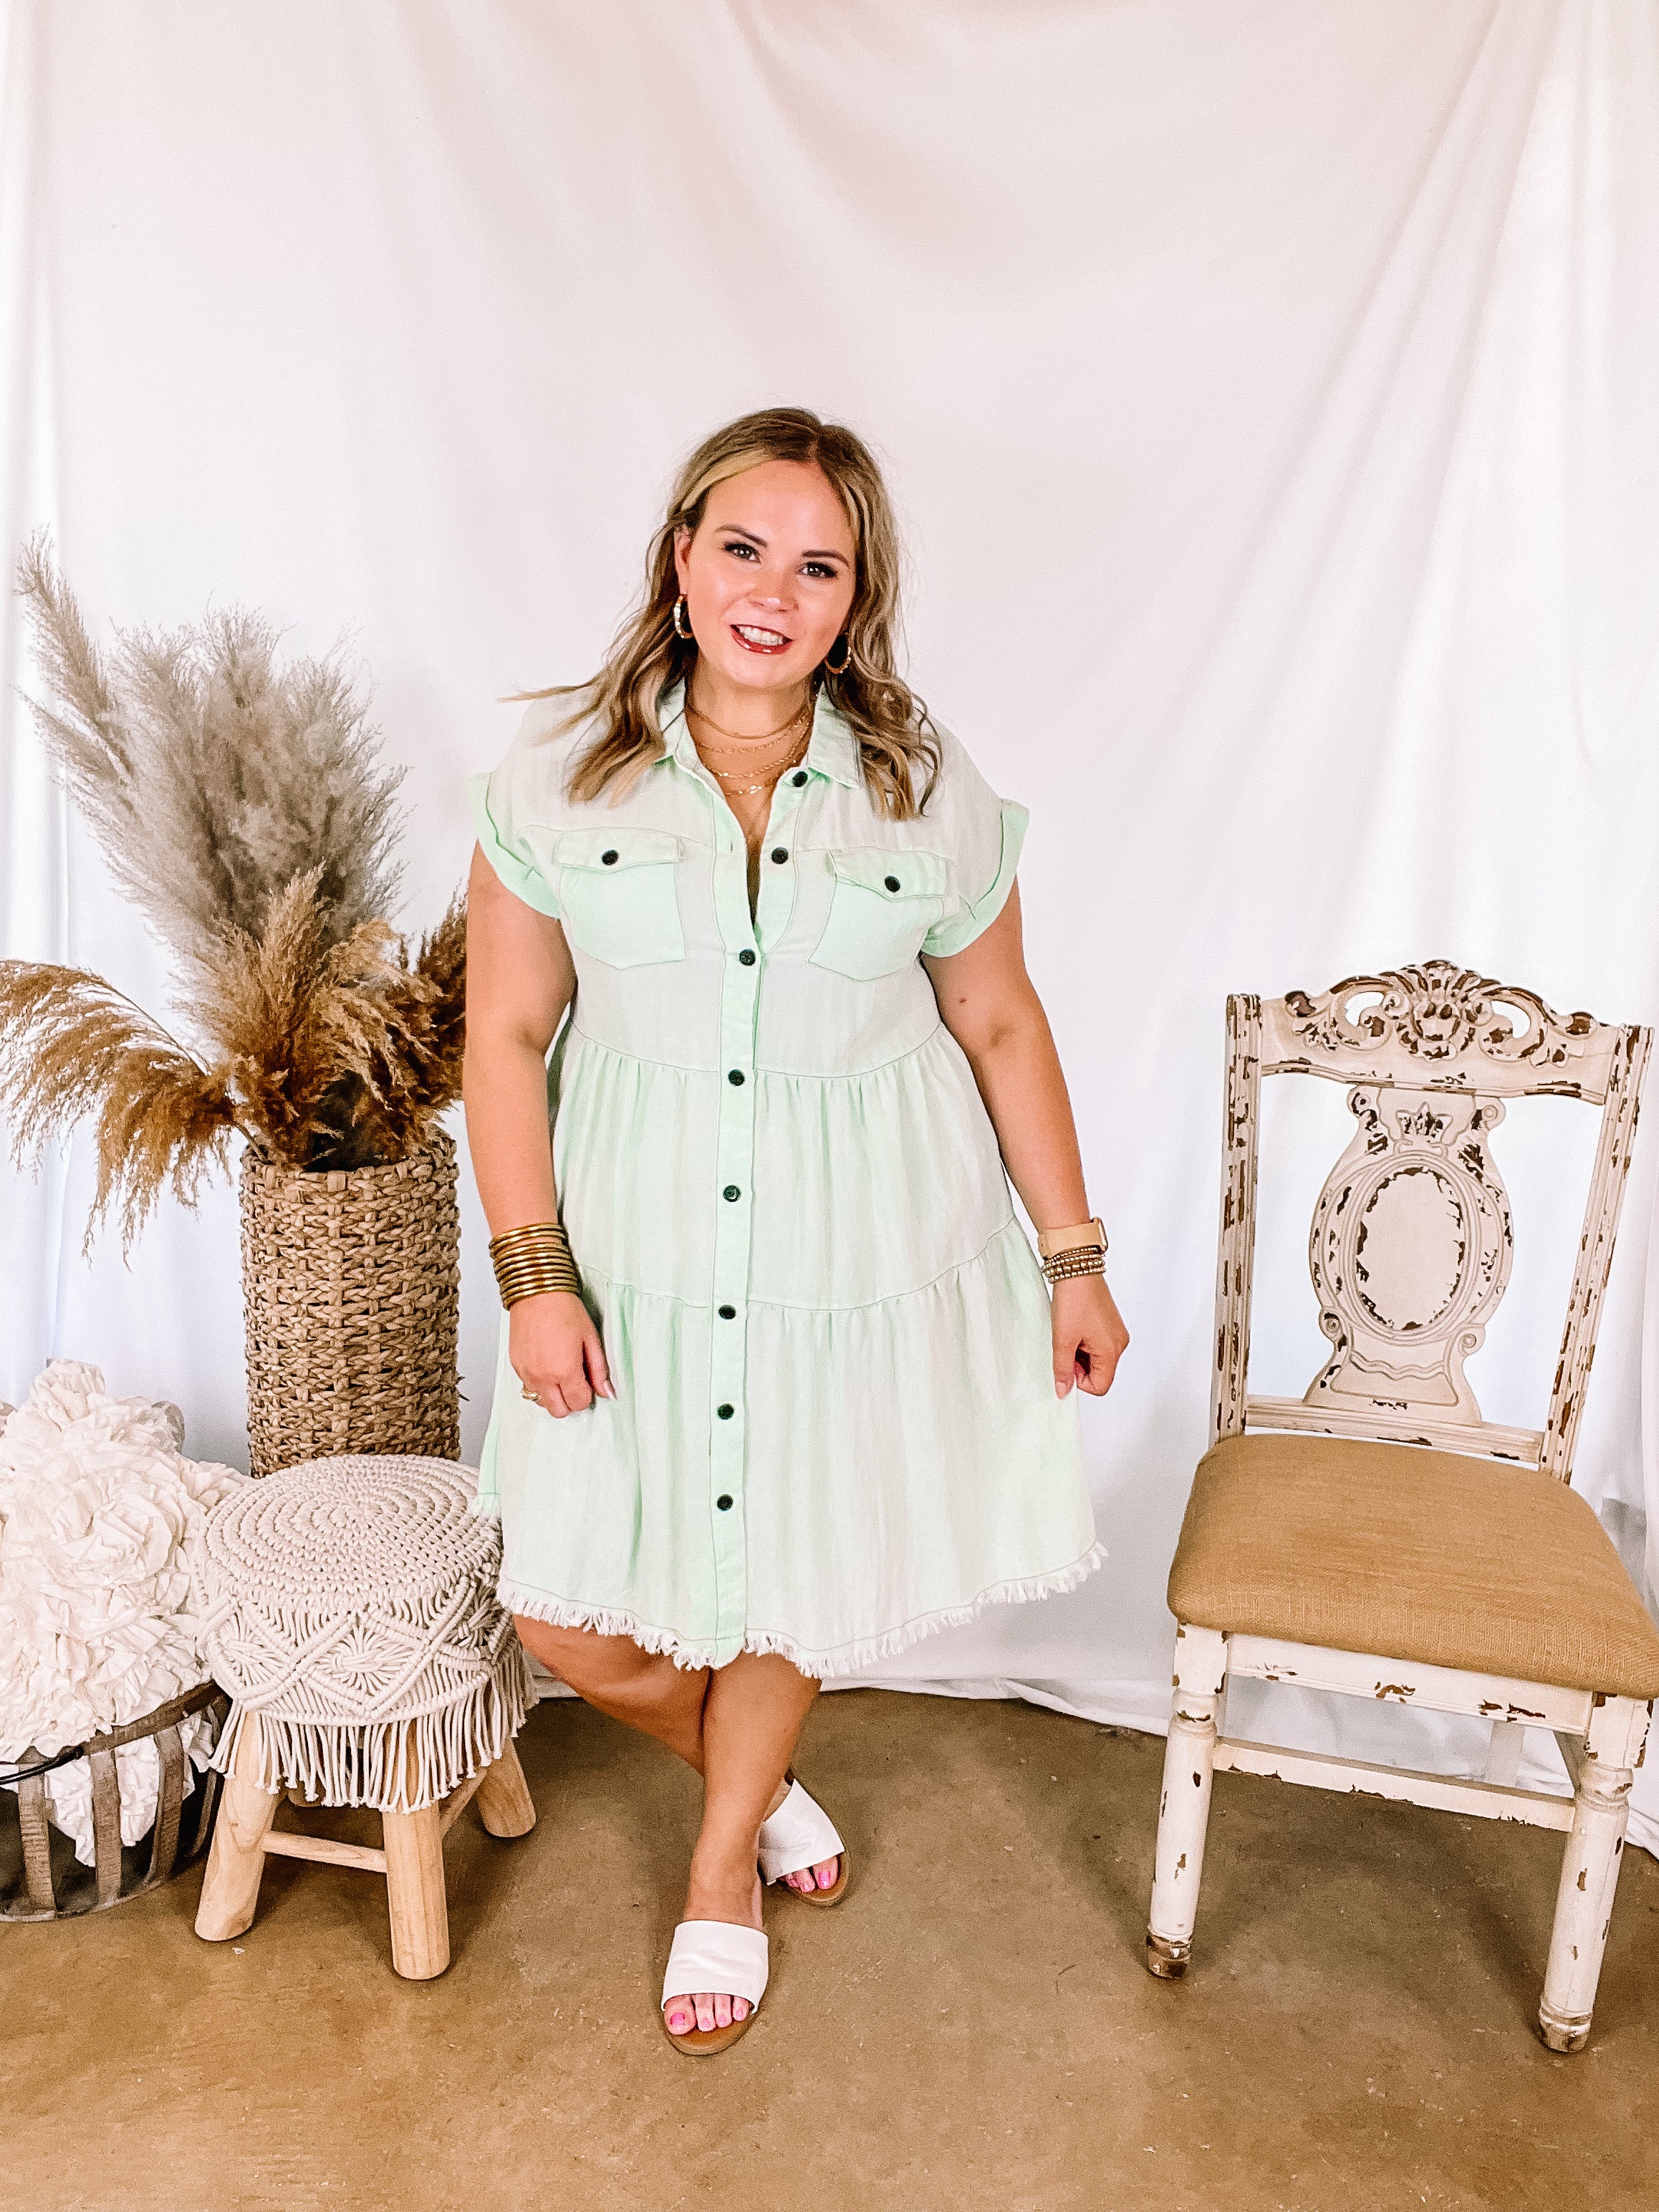 Oh Darling Ruffle Tiered Button Up Dress in Mint Green - Giddy Up Glamour Boutique